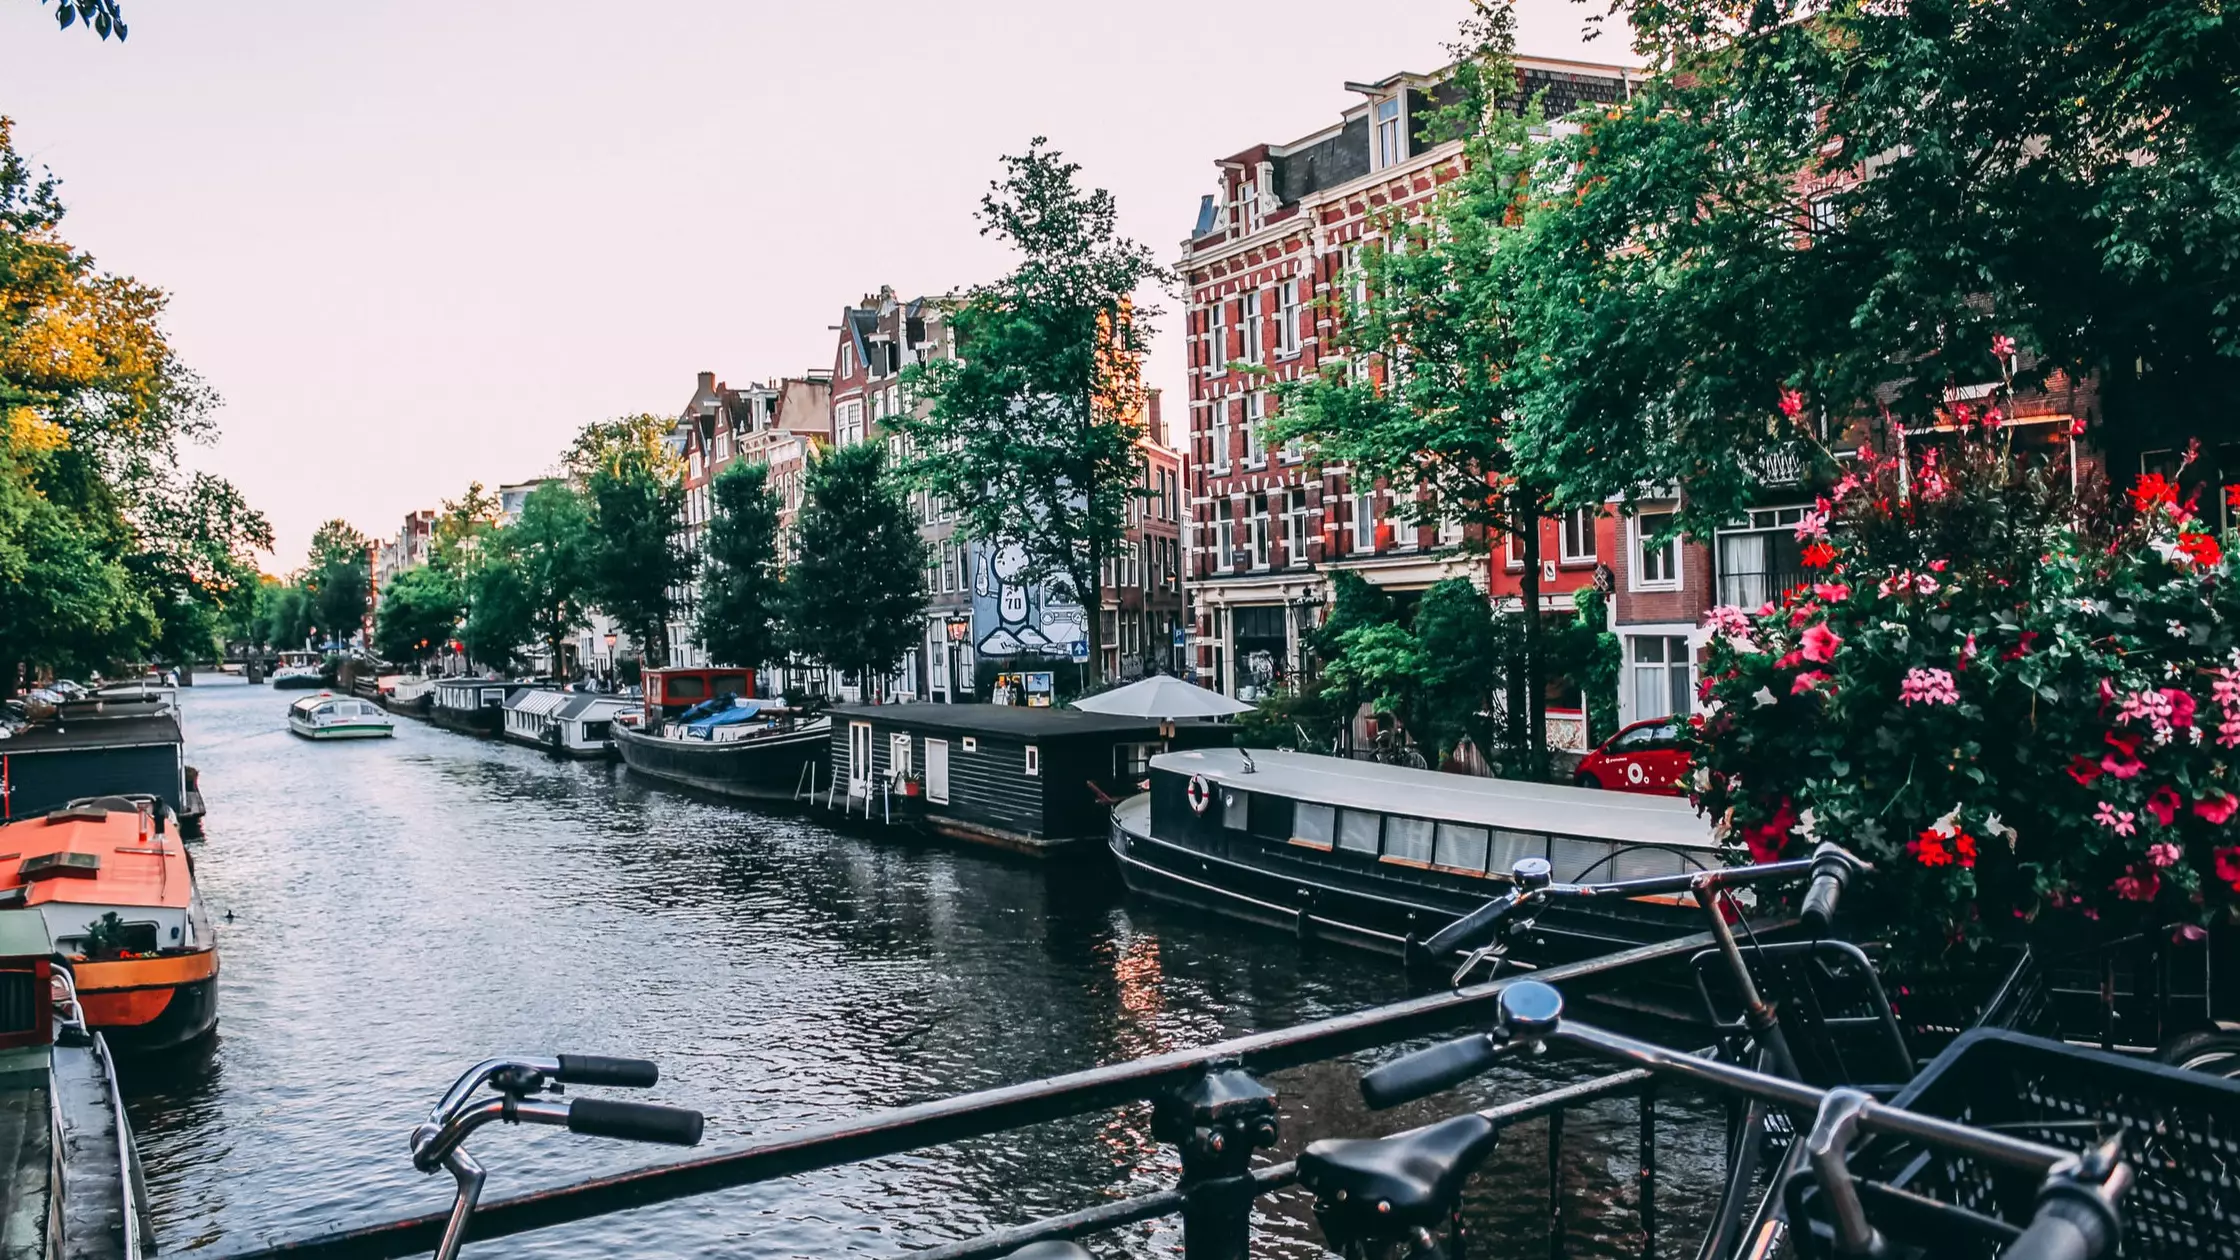 Eurostar Launches Direct Return Journeys From London To Amsterdam For £35